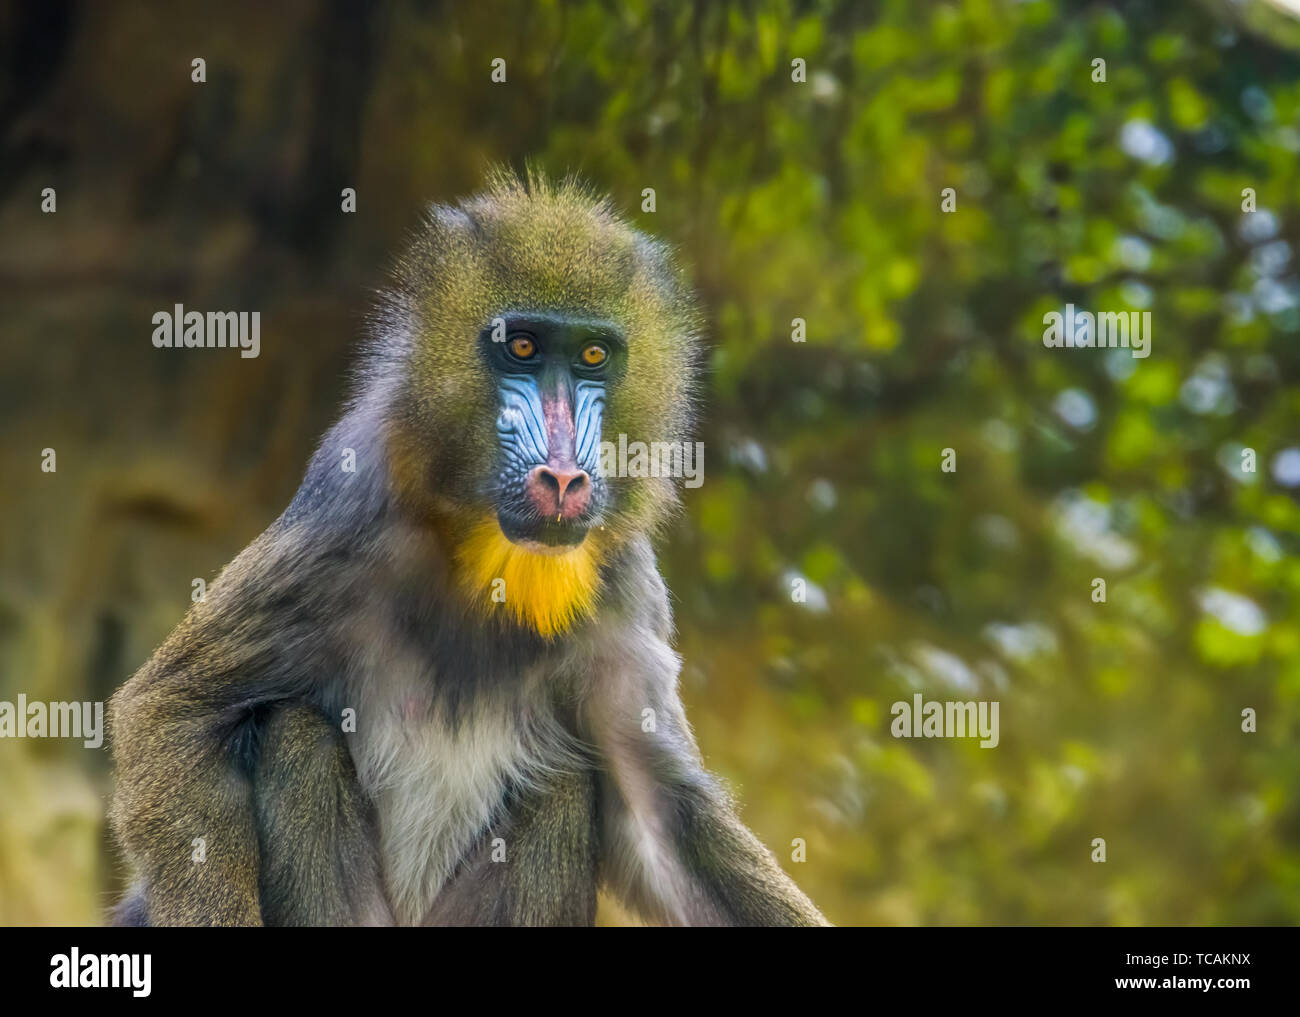 Closeup Portrait Of A Mandrill Monkey Vulnerable Animal Specie Tropical Primate From Cameroon Africa Stock Photo Alamy